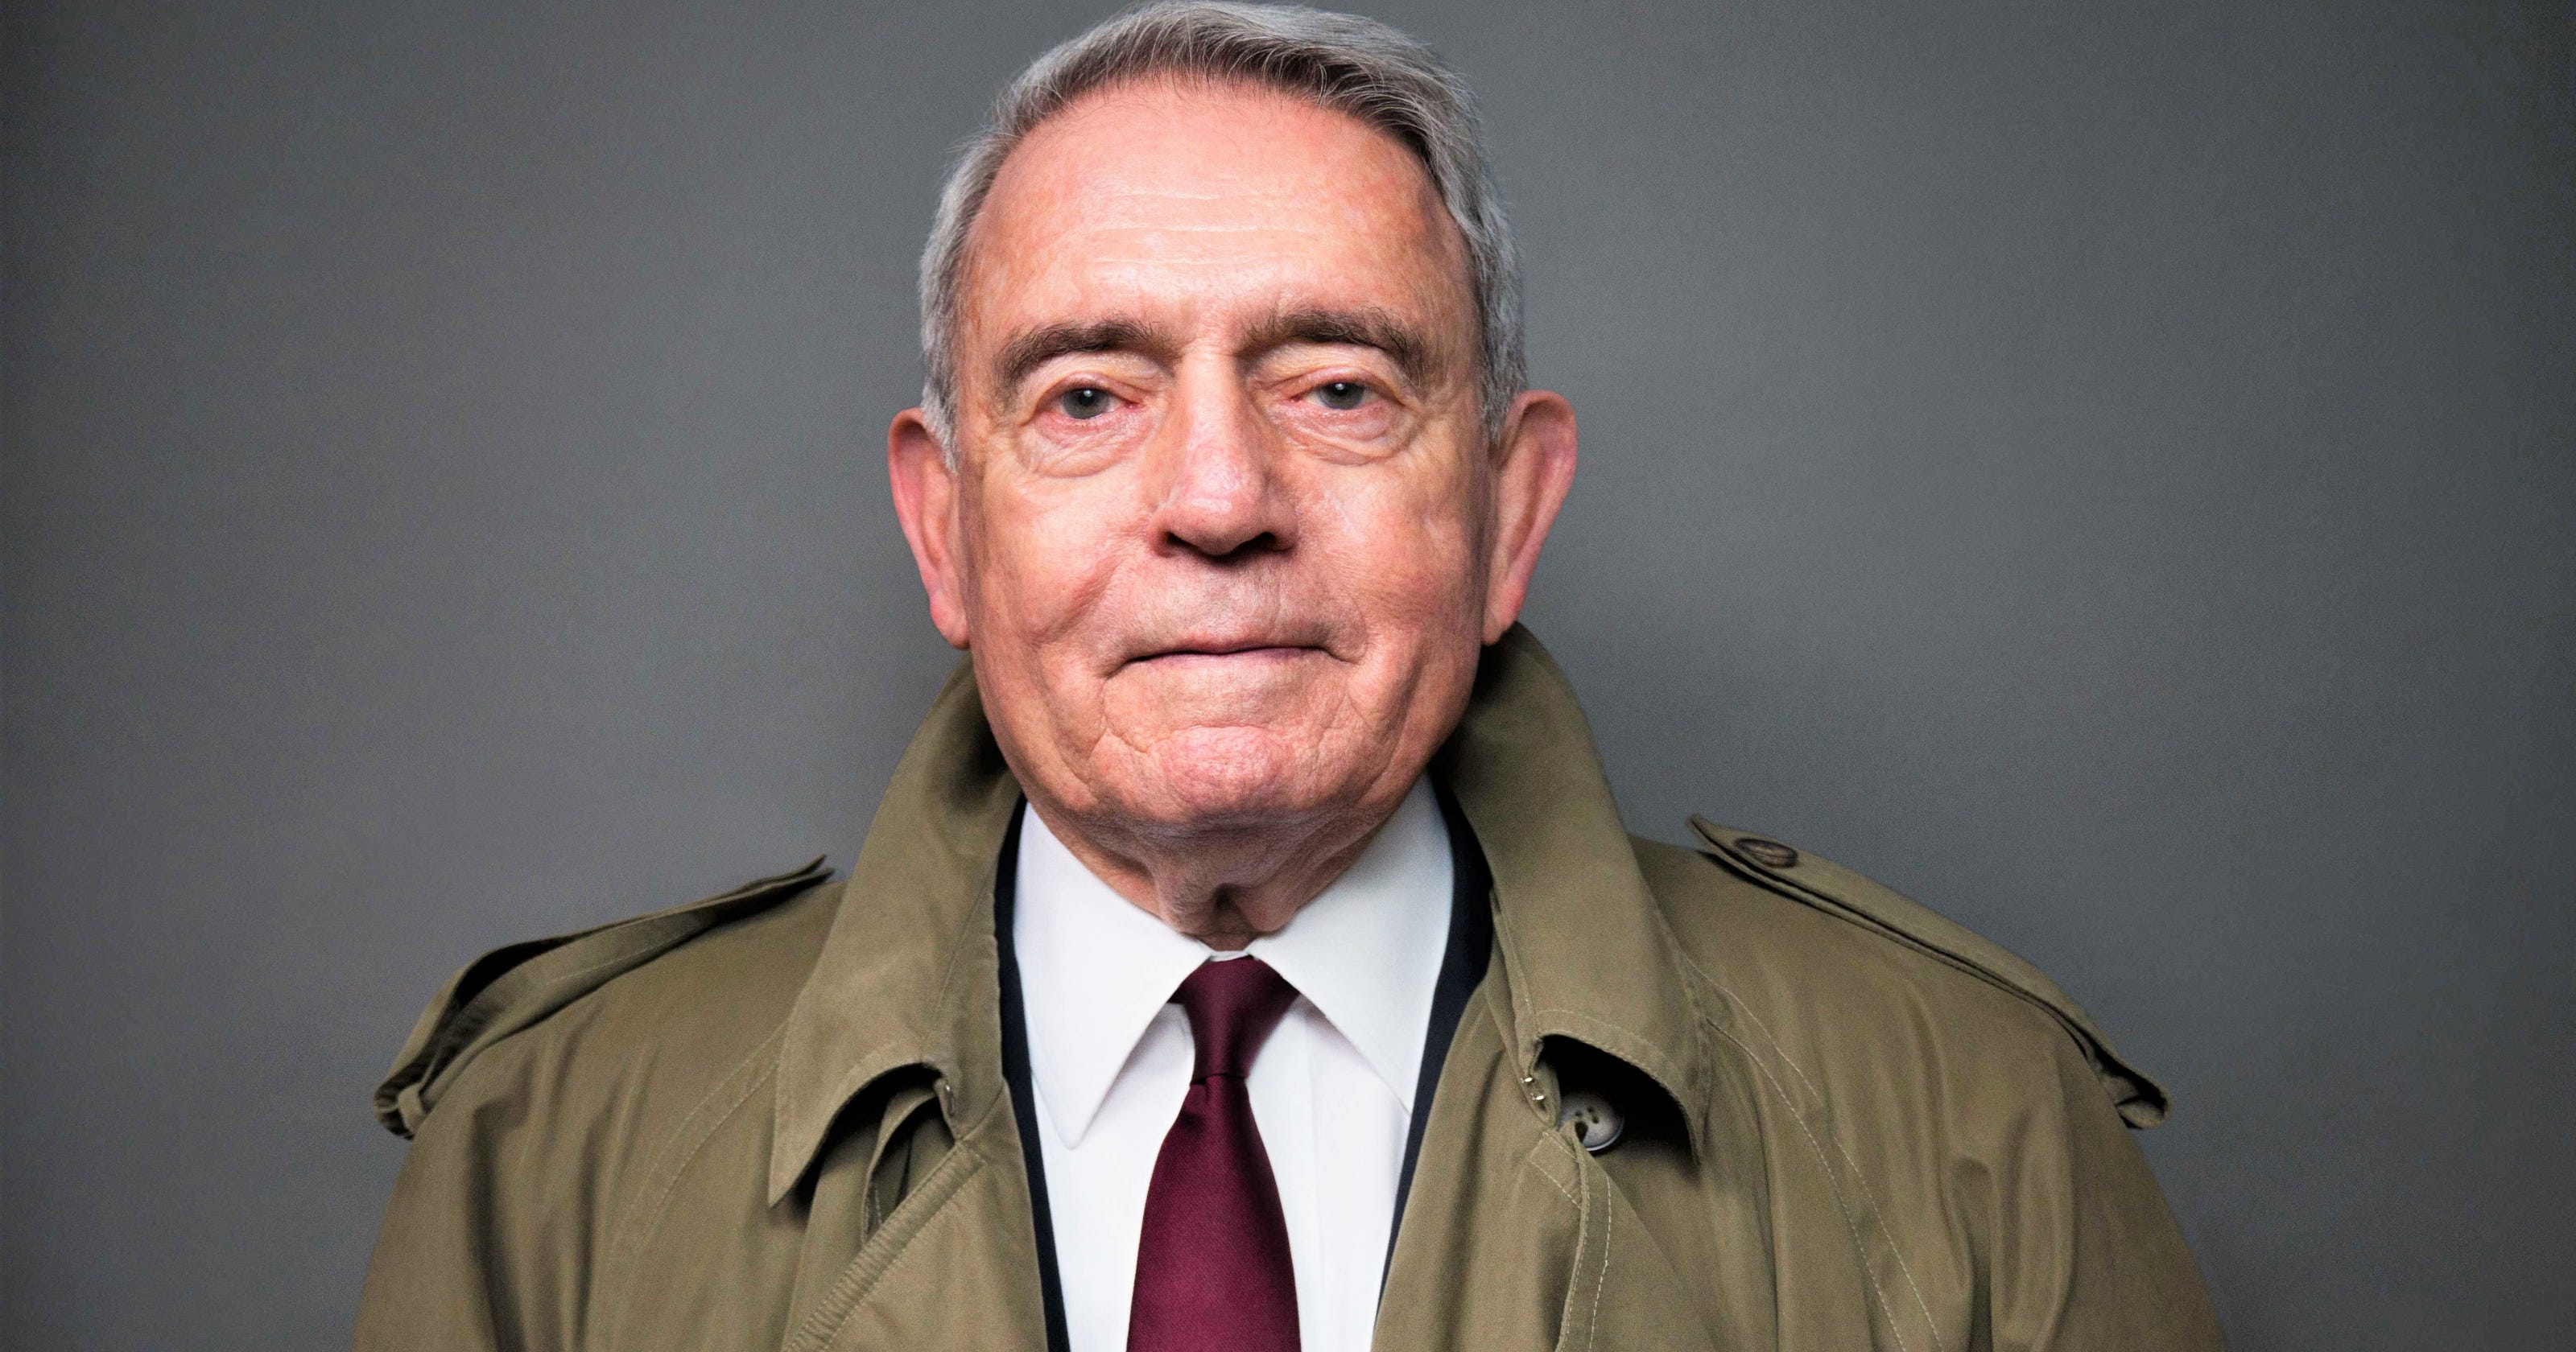 'What Unites Us' Dan Rather talks about politics in America ahead of